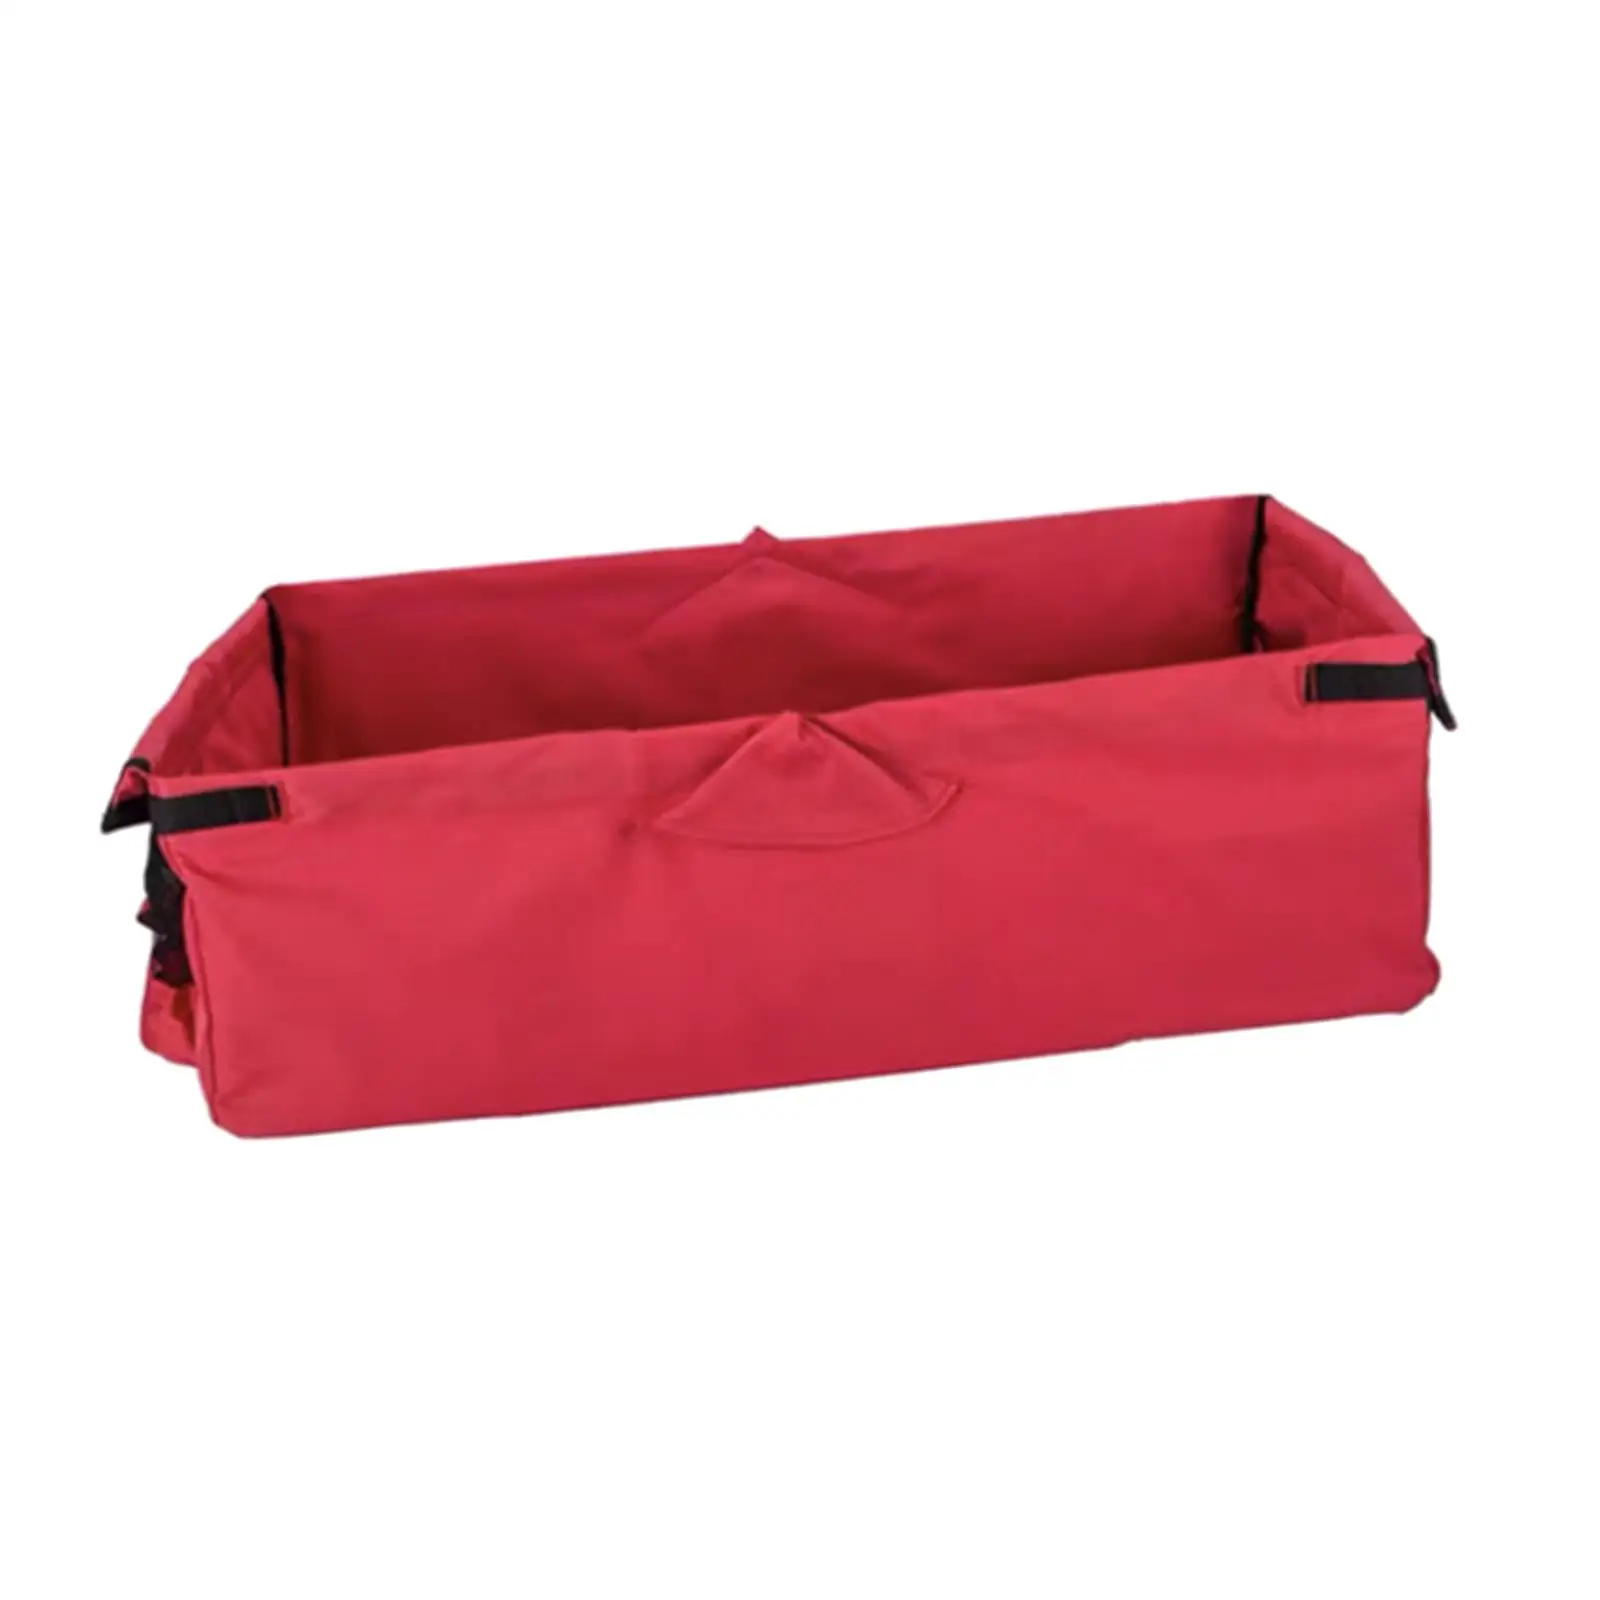 Outdoor Wagon Liner, Trolley Cart Removable Oxford Cloth Liner, for